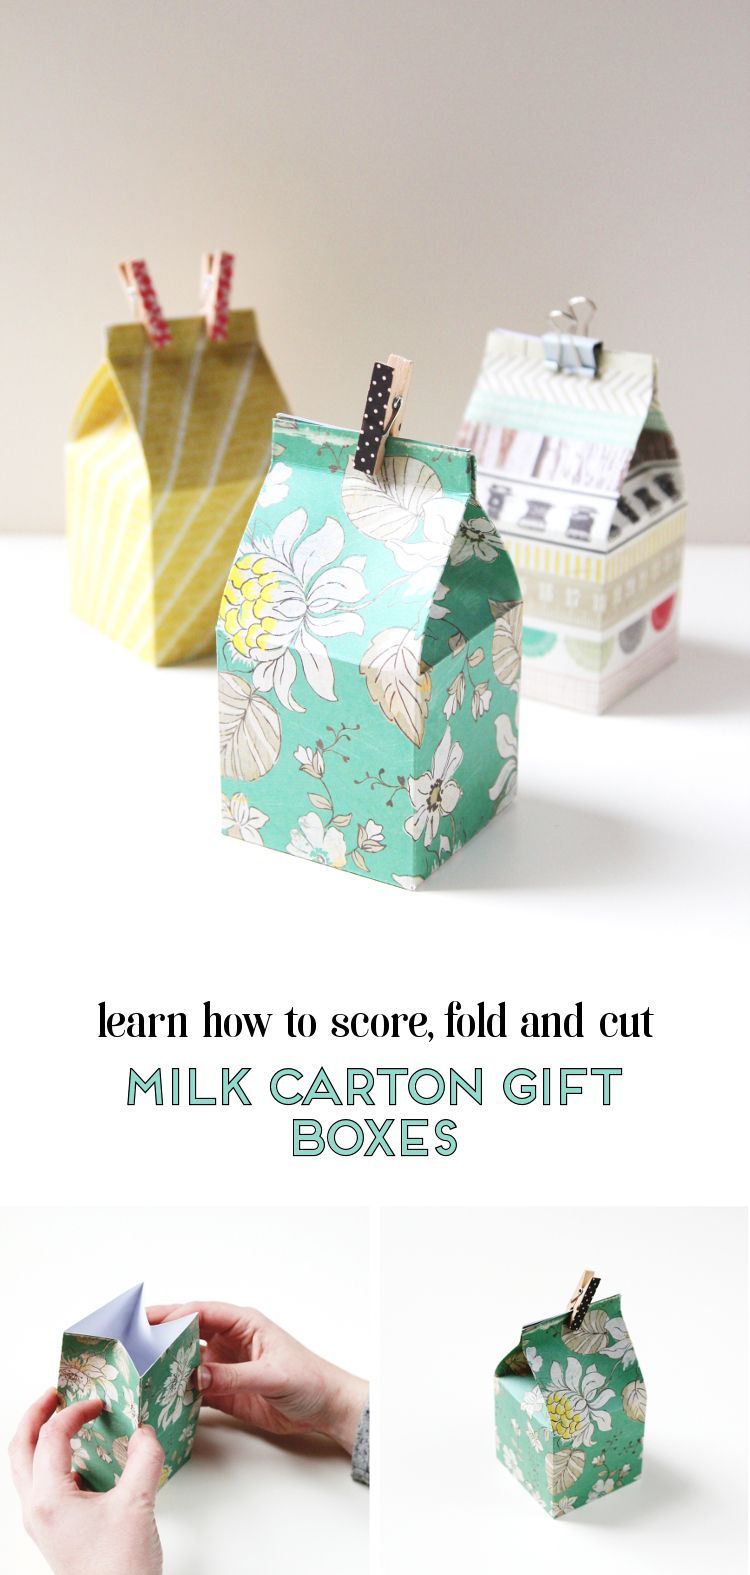 LEARN HOW TO CUT, FOLD AND SCORE DIY MINI MILK CARTON GIFT BOXES. — Gathering Beauty - LEARN HOW TO CUT, FOLD AND SCORE DIY MINI MILK CARTON GIFT BOXES. — Gathering Beauty -   12 diy Box packaging ideas